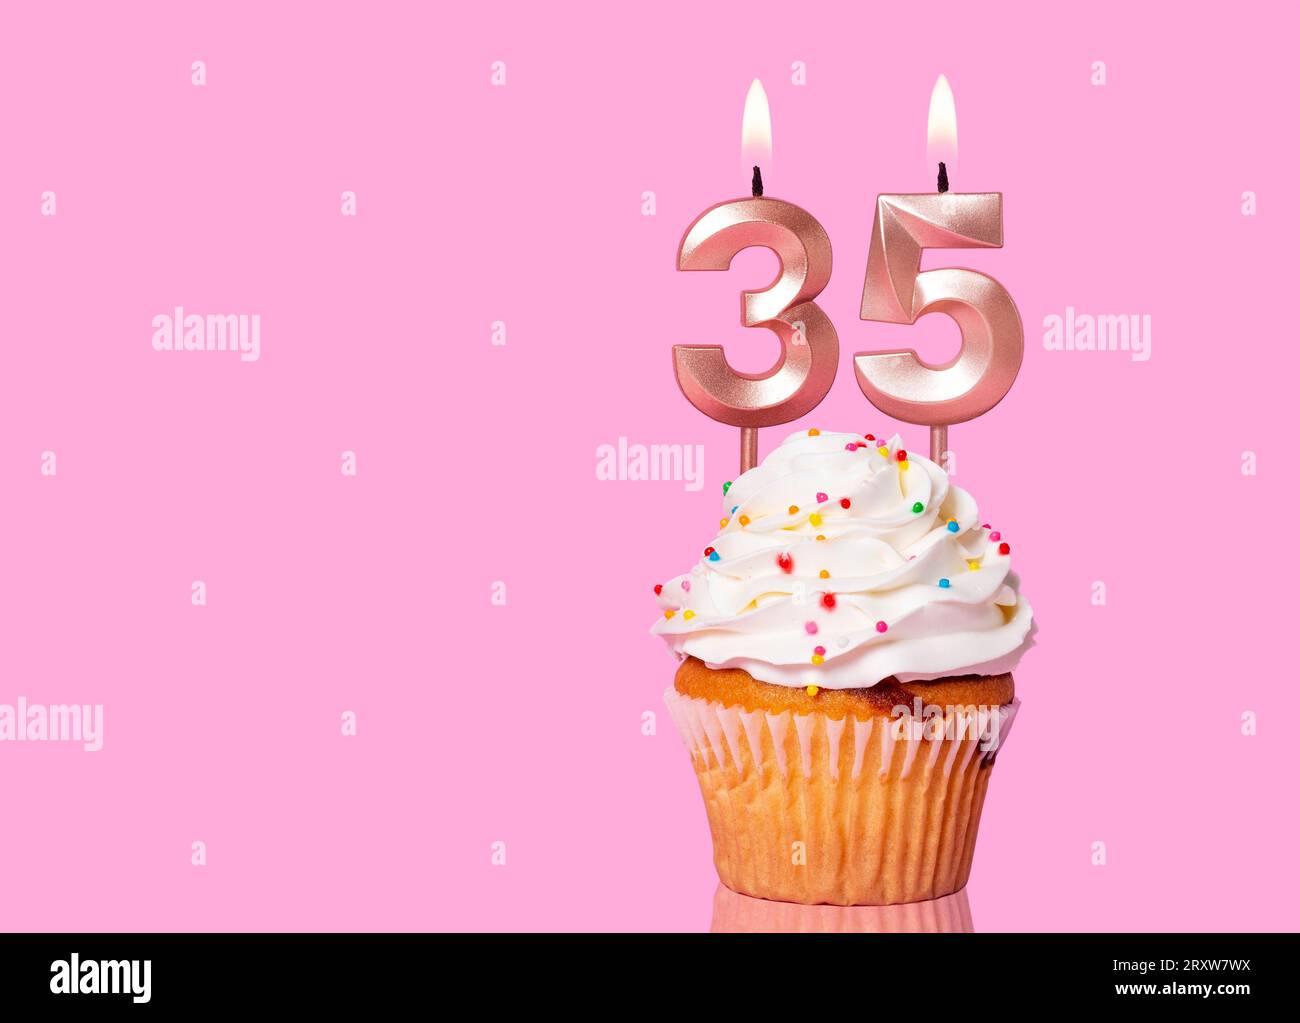 Birthday Cake With Candle Number 35 - On Pink Background. Stock Photo